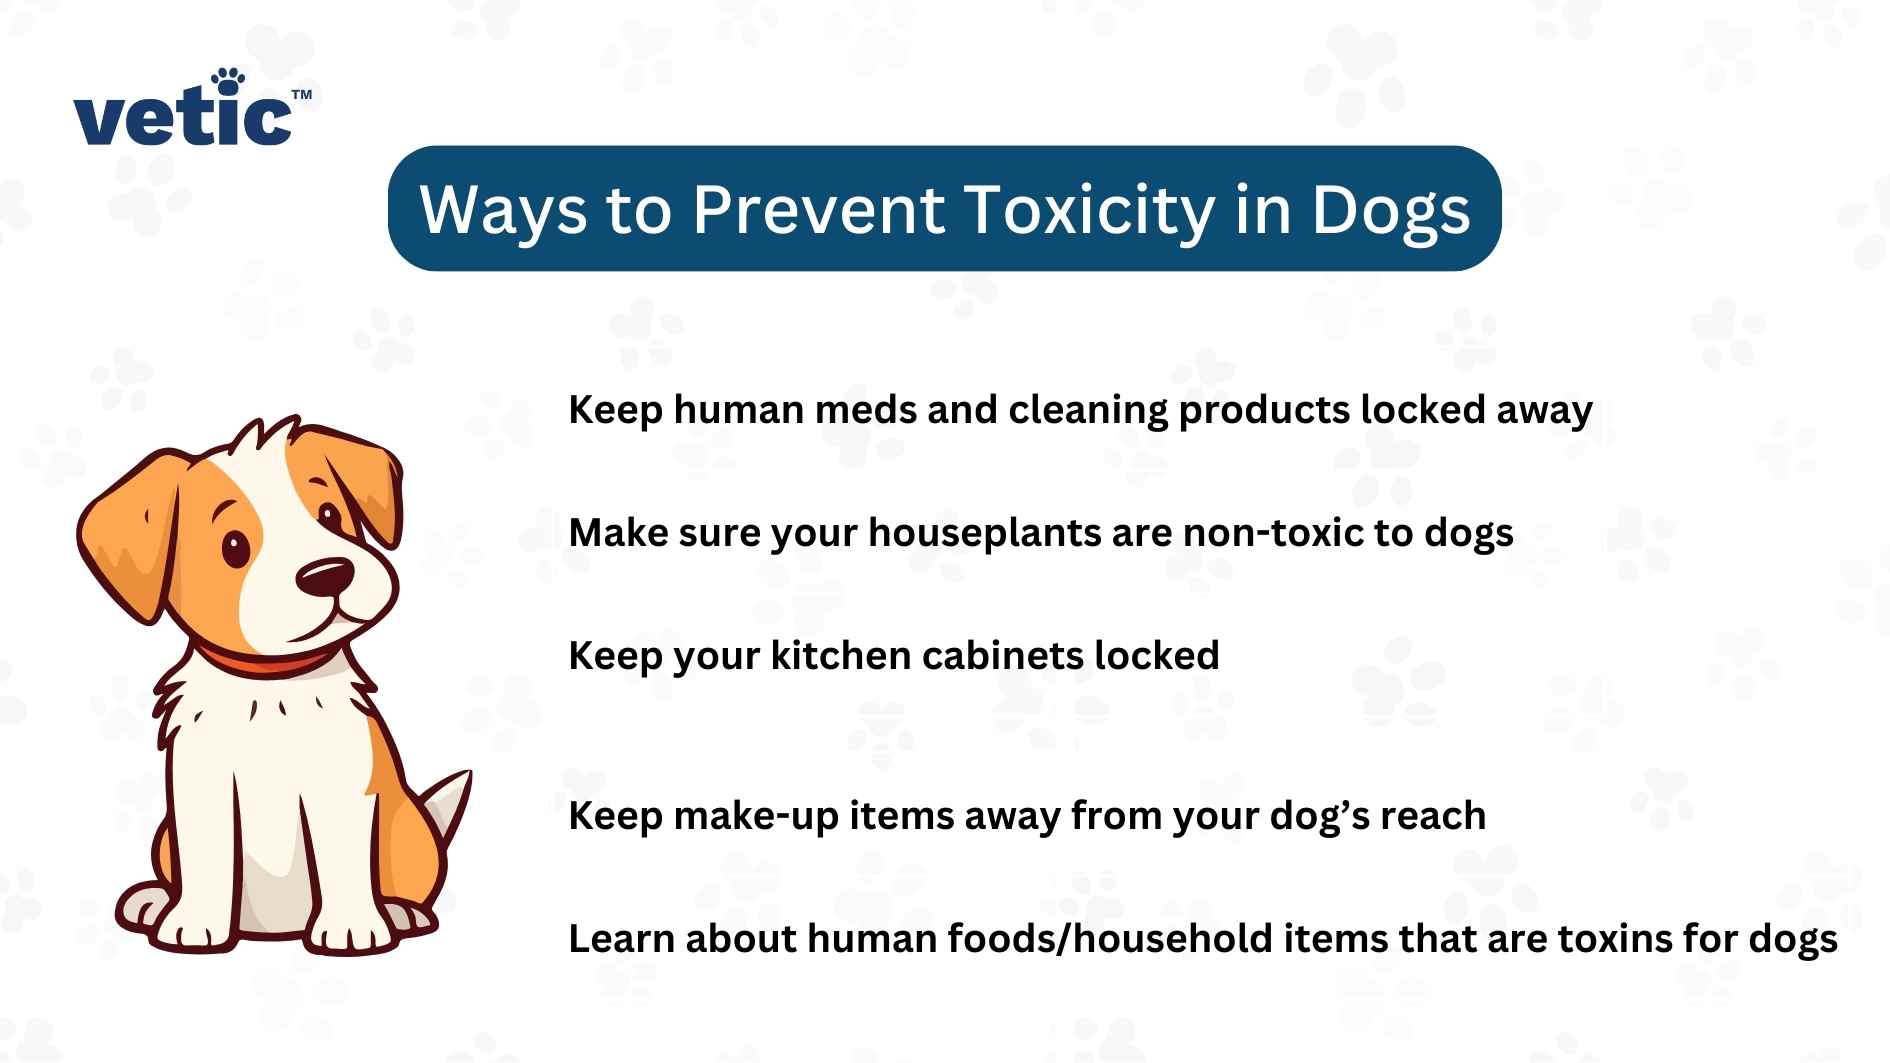 Ways to Prevent Toxicity in Dogs: Keep human meds and cleaning products locked away Make sure your houseplants are non-toxic to dogs Keep your kitchen cabinets locked Keep make-up items away from your dog’s reach Learn about human foods/household items that are toxins for dogs